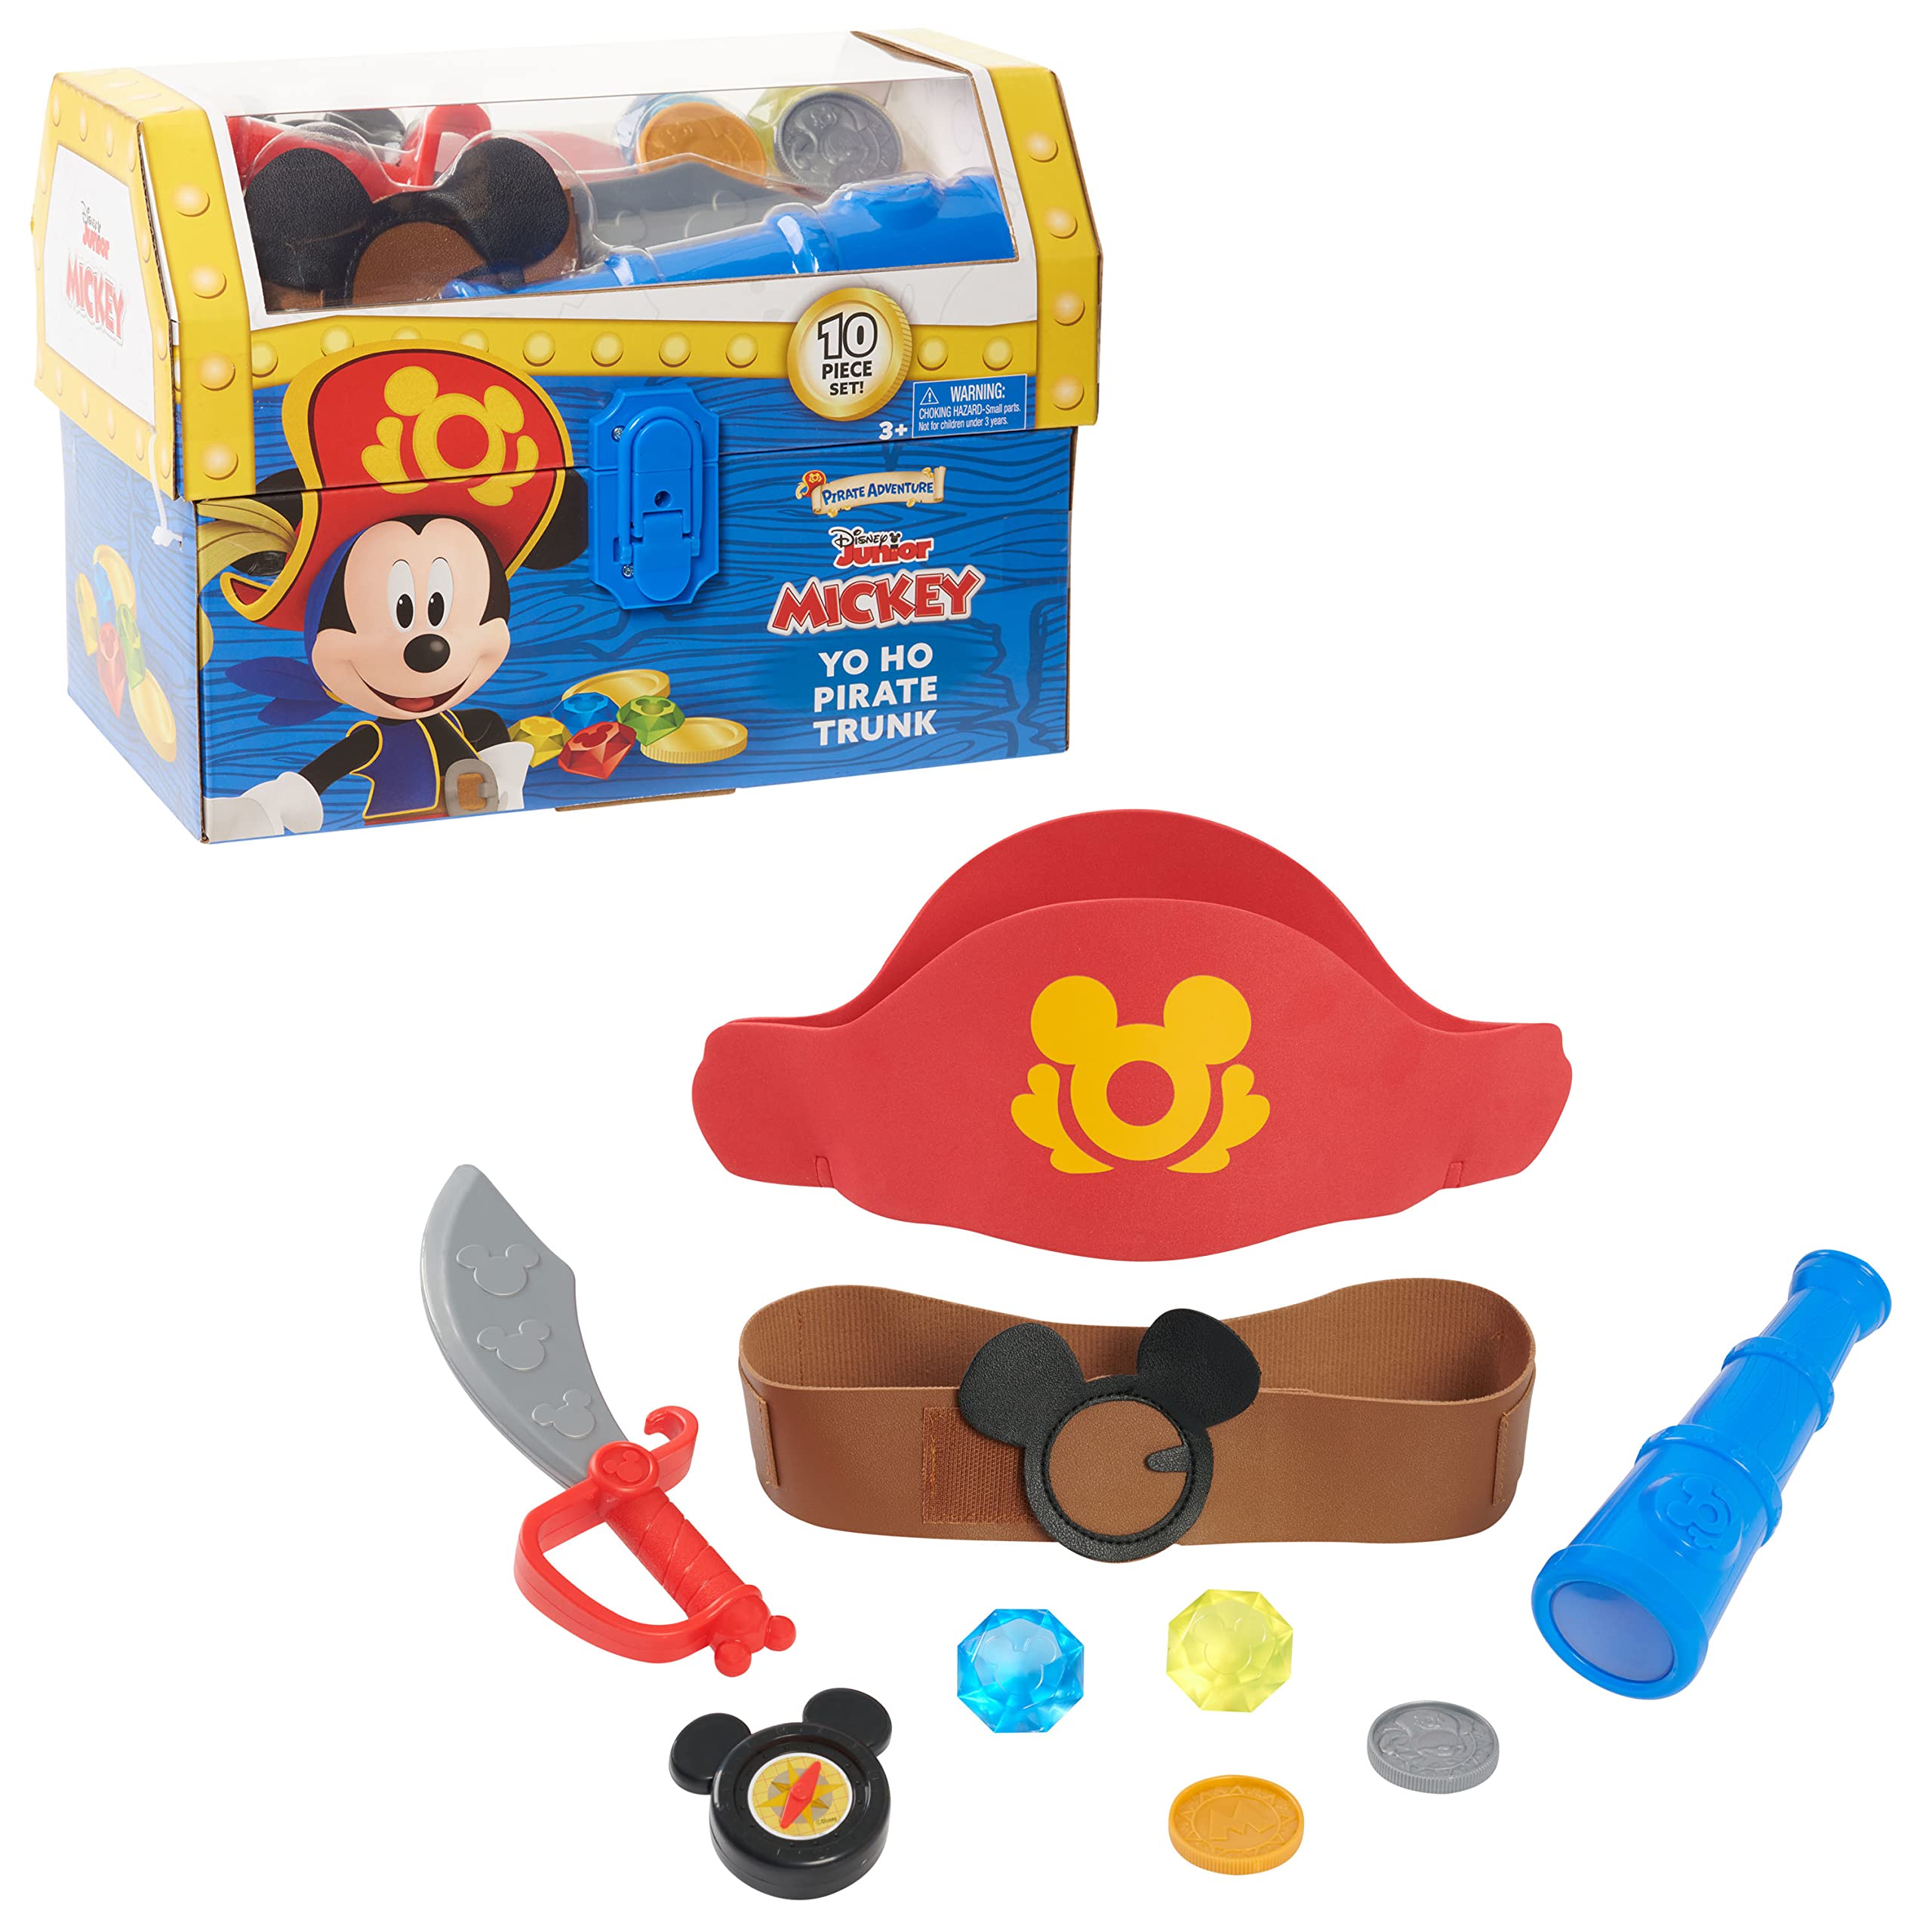 Disney Junior Mickey Mouse Funhouse Yo-Ho Pirate Trunk, Dress Up and Pretend Play, Officially Licensed Kids Toys for Ages 3 Up, Gifts and Presents by Just Play